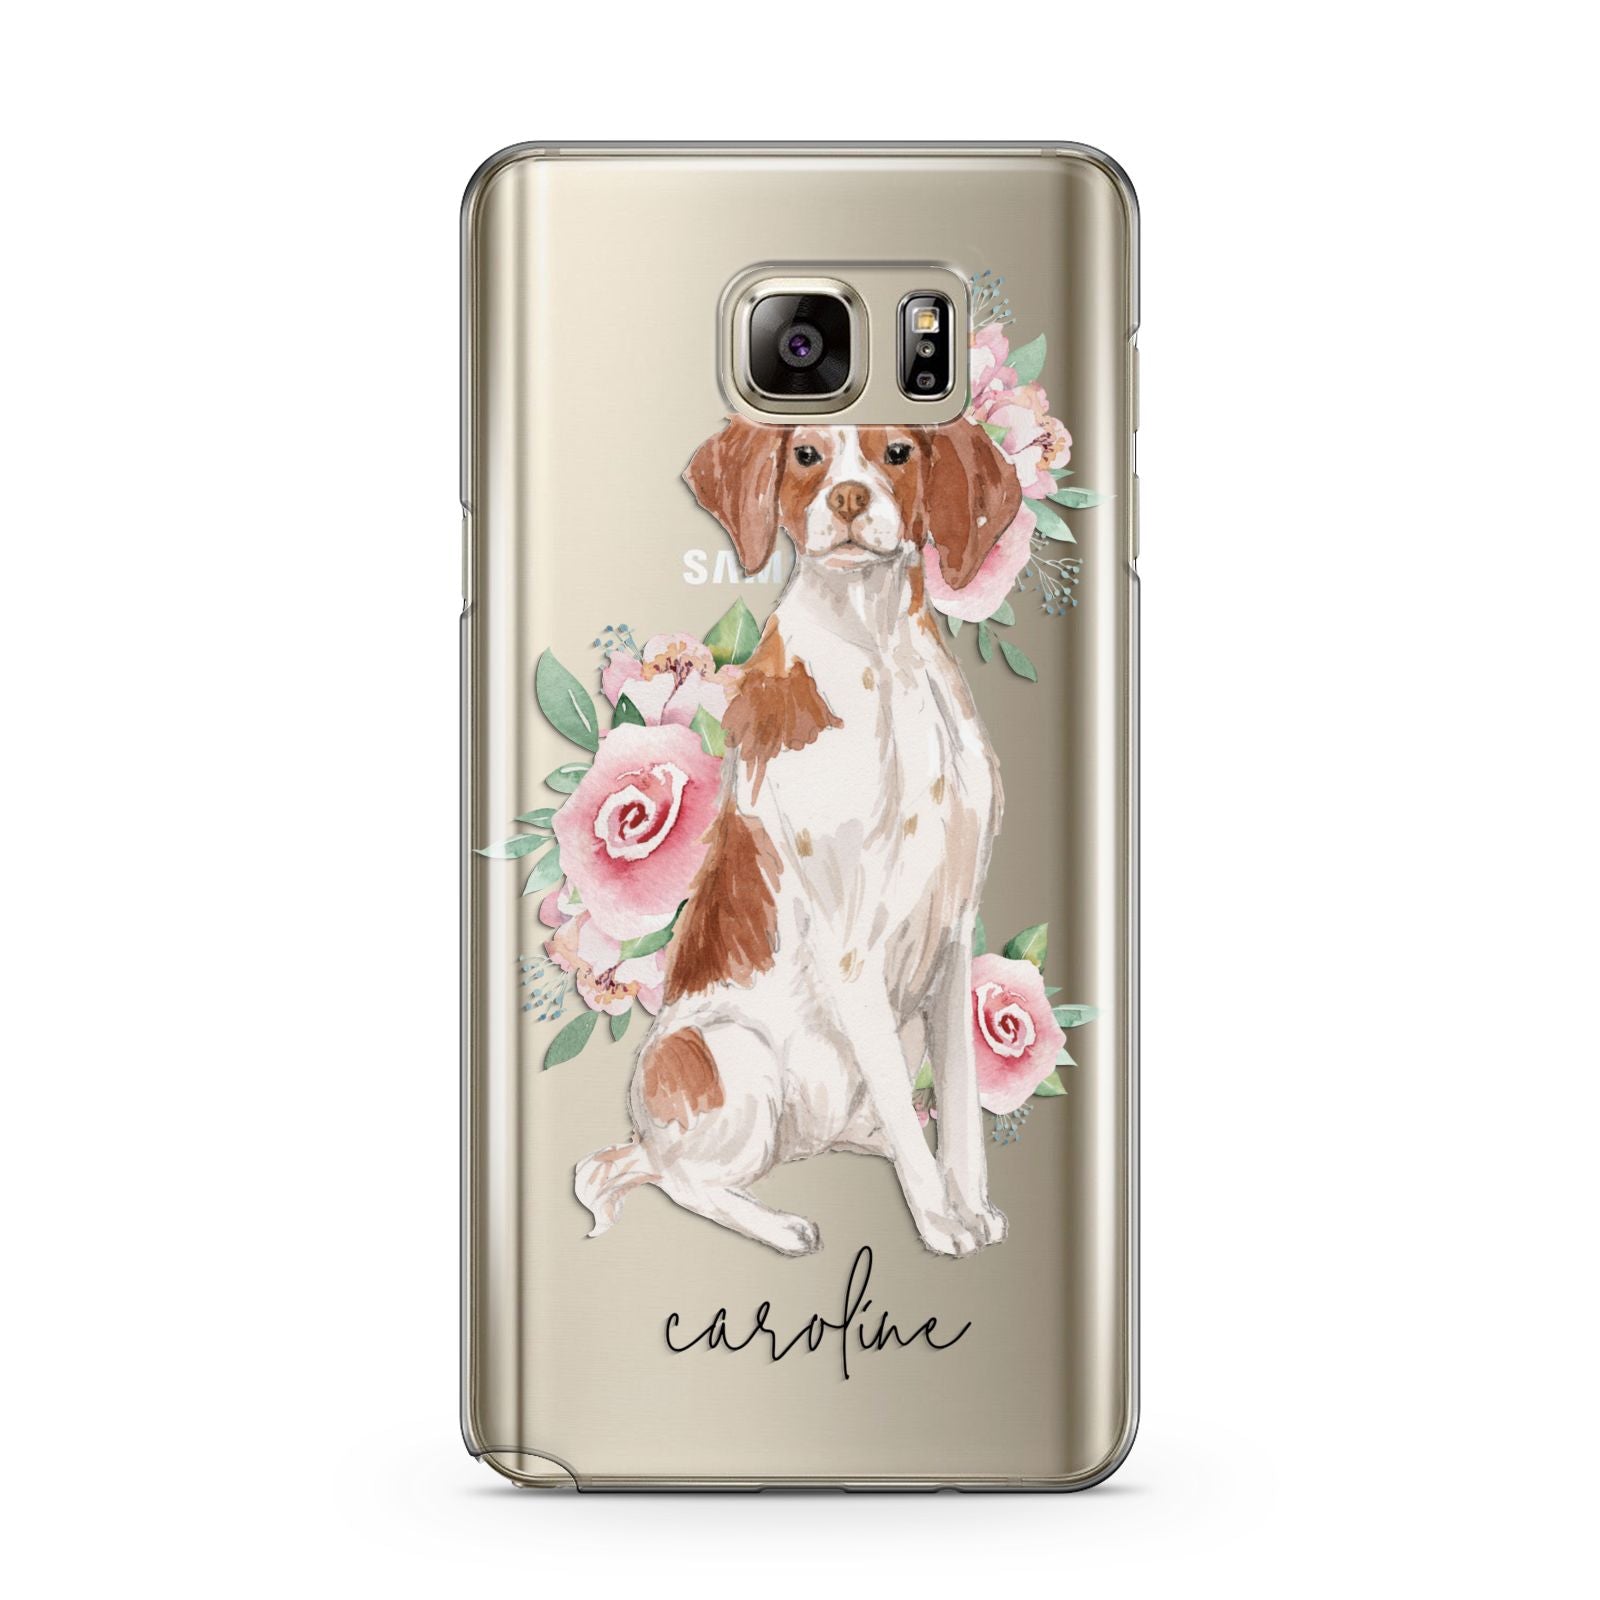 Personalised Brittany Dog Samsung Galaxy Note 5 Case